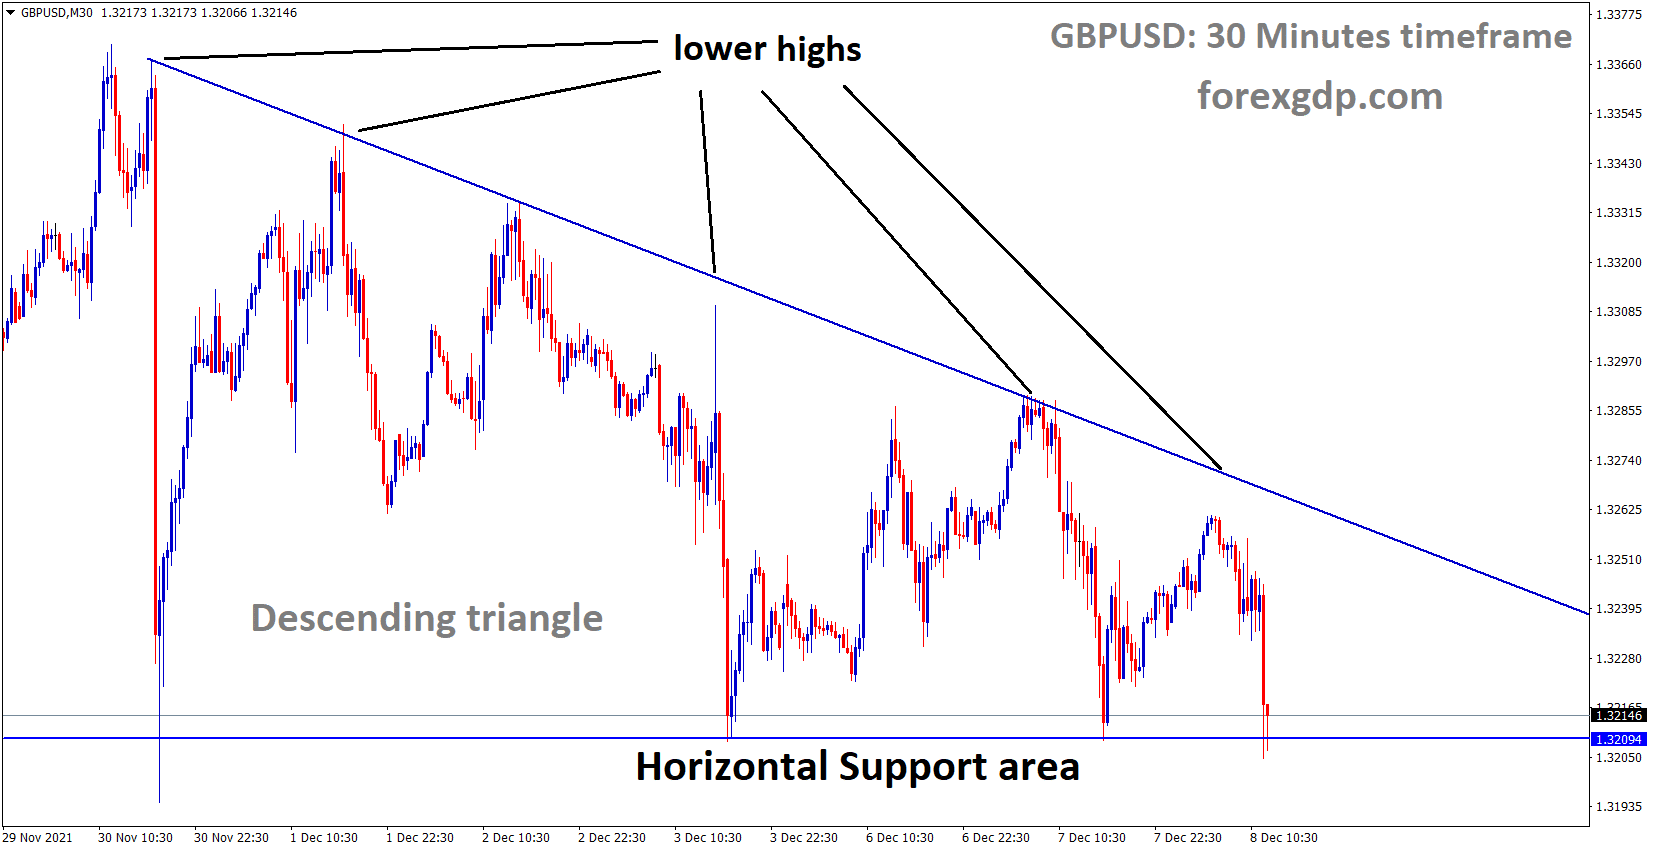 GBPUSD is moving in the Descending triangle pattern and the market has reached the horizontal support area 1